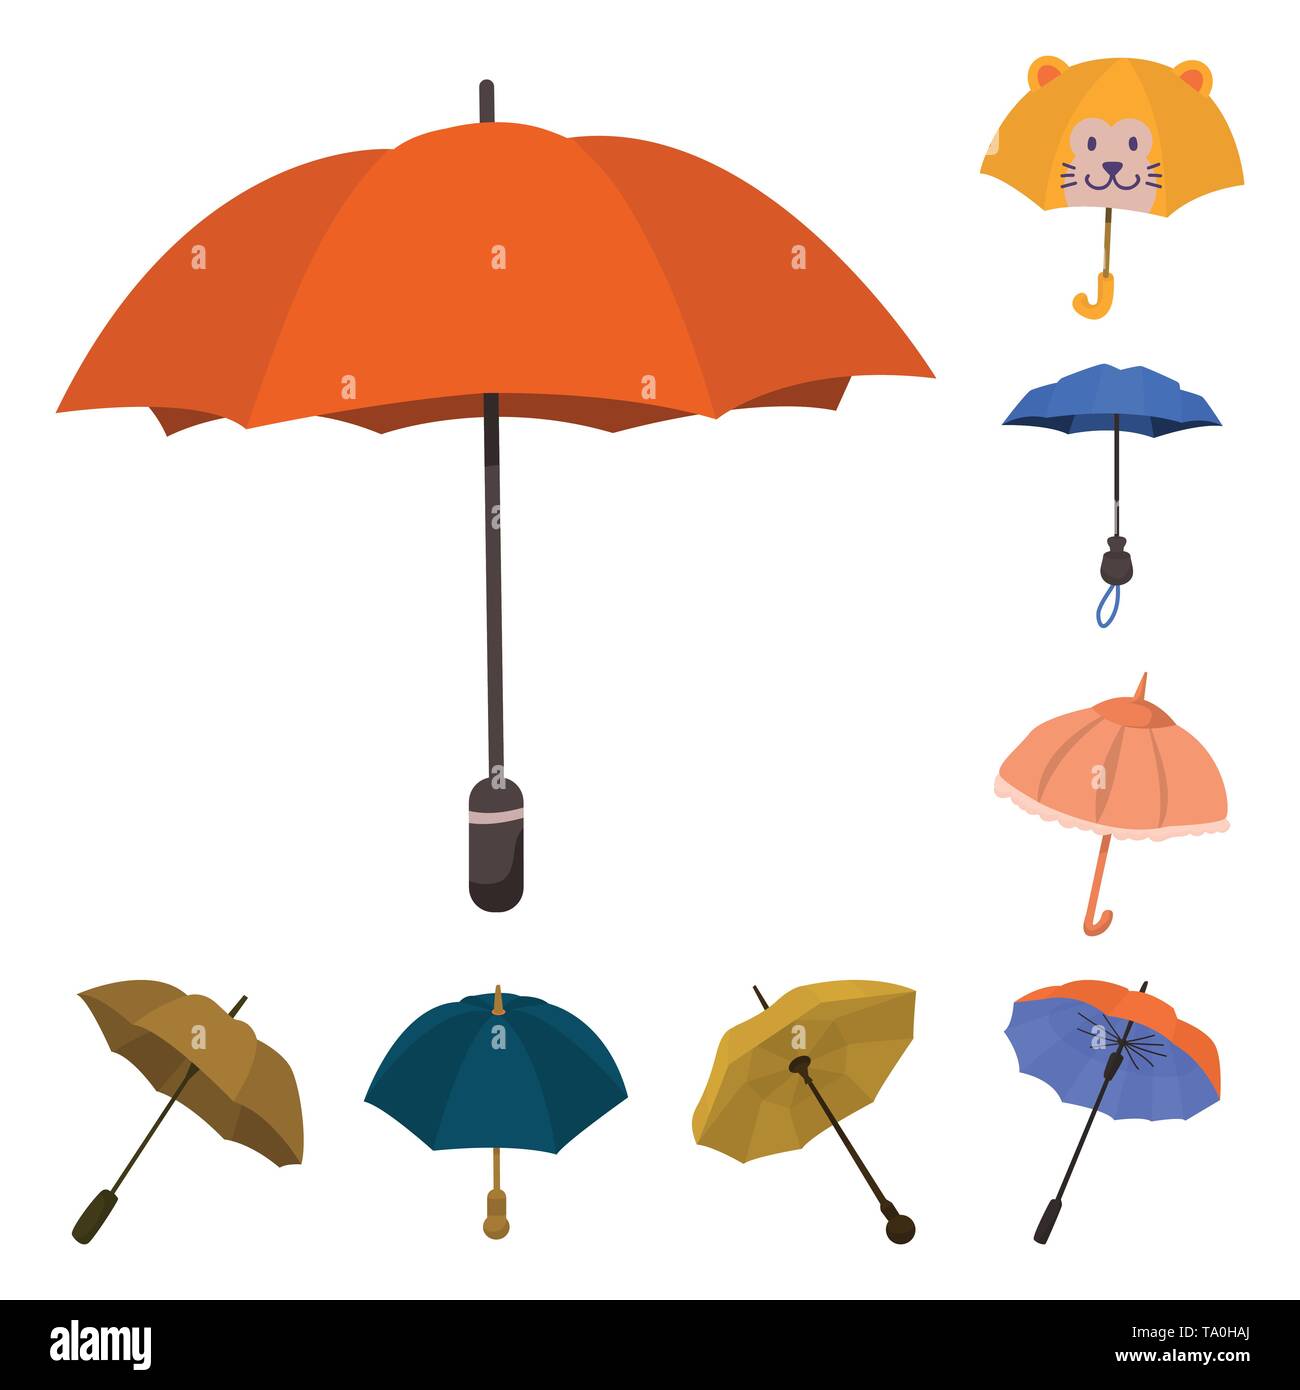 tarwe vis Algemeen parasol,water,children,coverage,autumn,spring,summer,support,blue,storm,yellow,colorful,classic,shadow,monsoon,insurance,meteorology,climate,blank,orange,canopy,umbrella,rain,season,weather,rainy,open,protection,closed,fashion,safety,set,vector,icon  ...